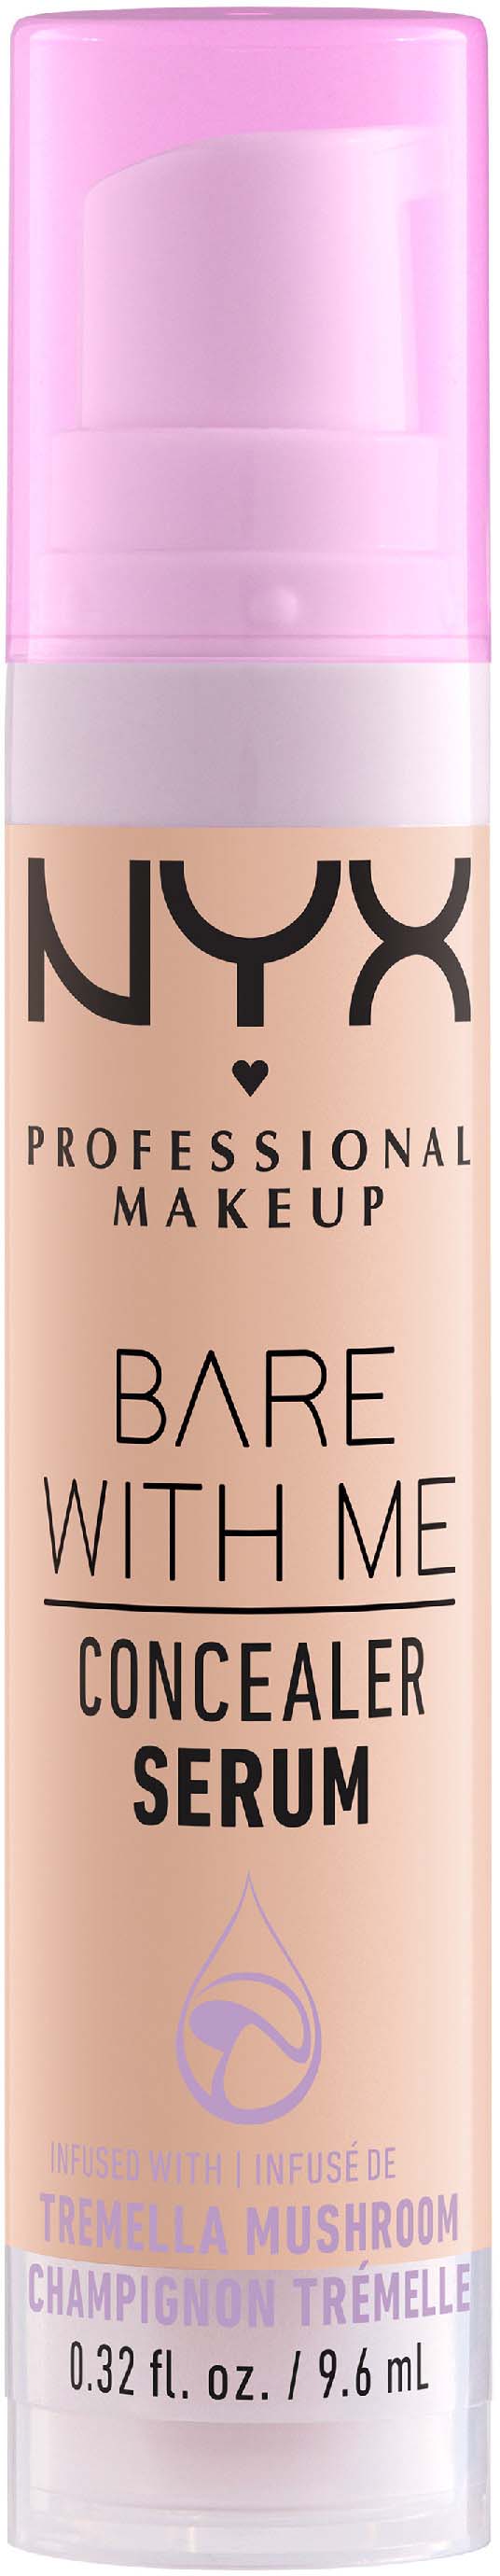 NYX PROFESSIONAL Me Light Concealer Serum Bare MAKEUP With